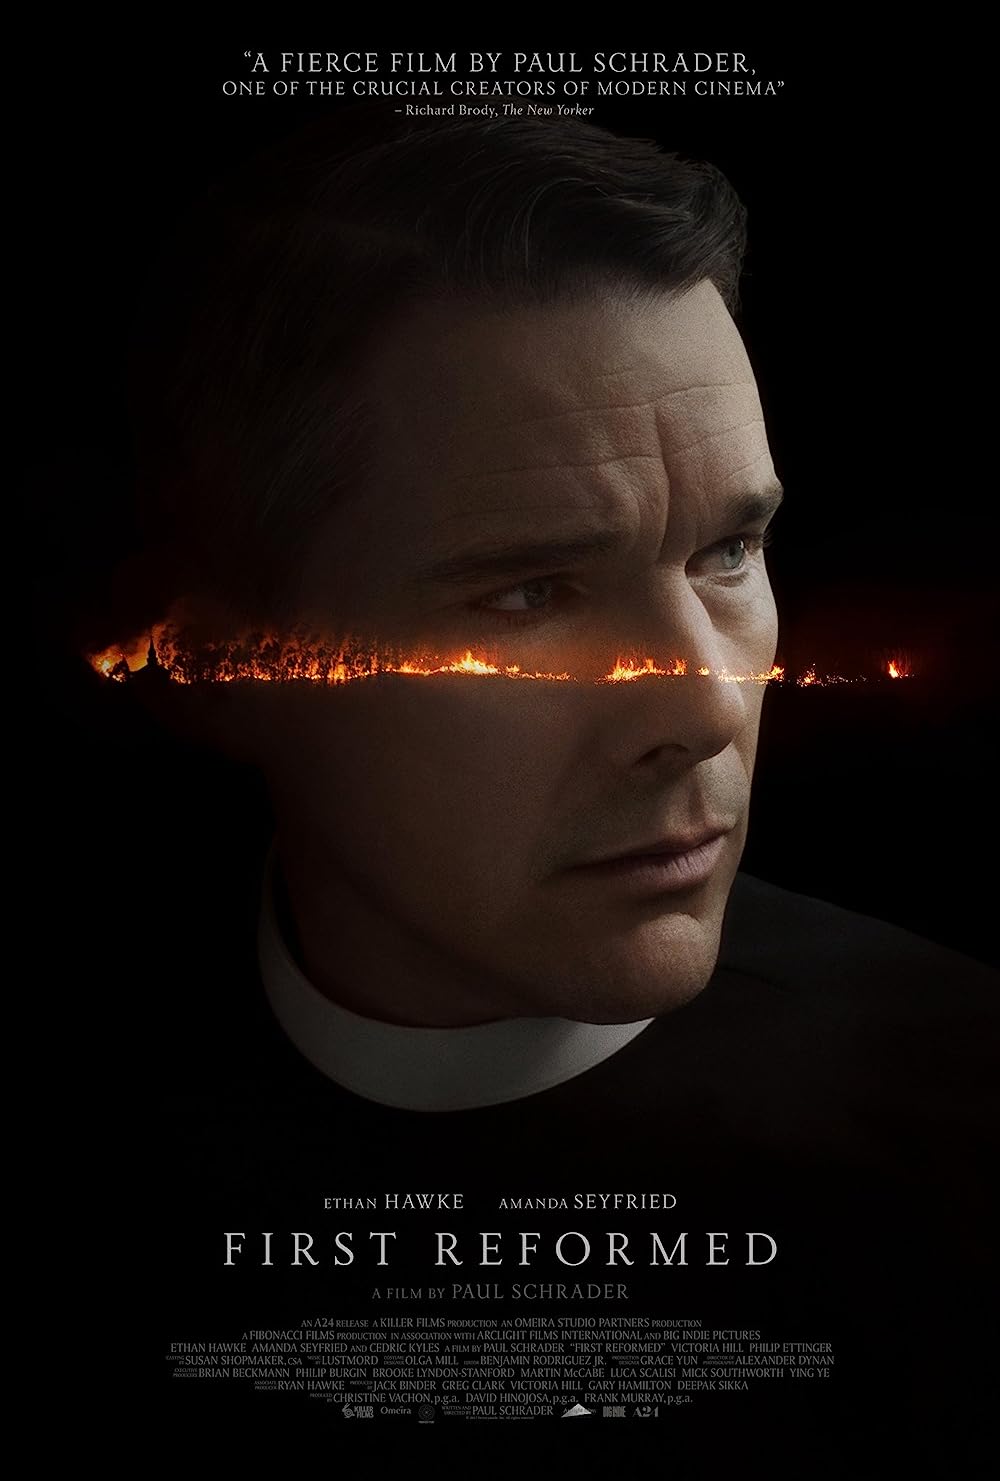 FIRST REFORMED (Rescheduled from Apr 15)